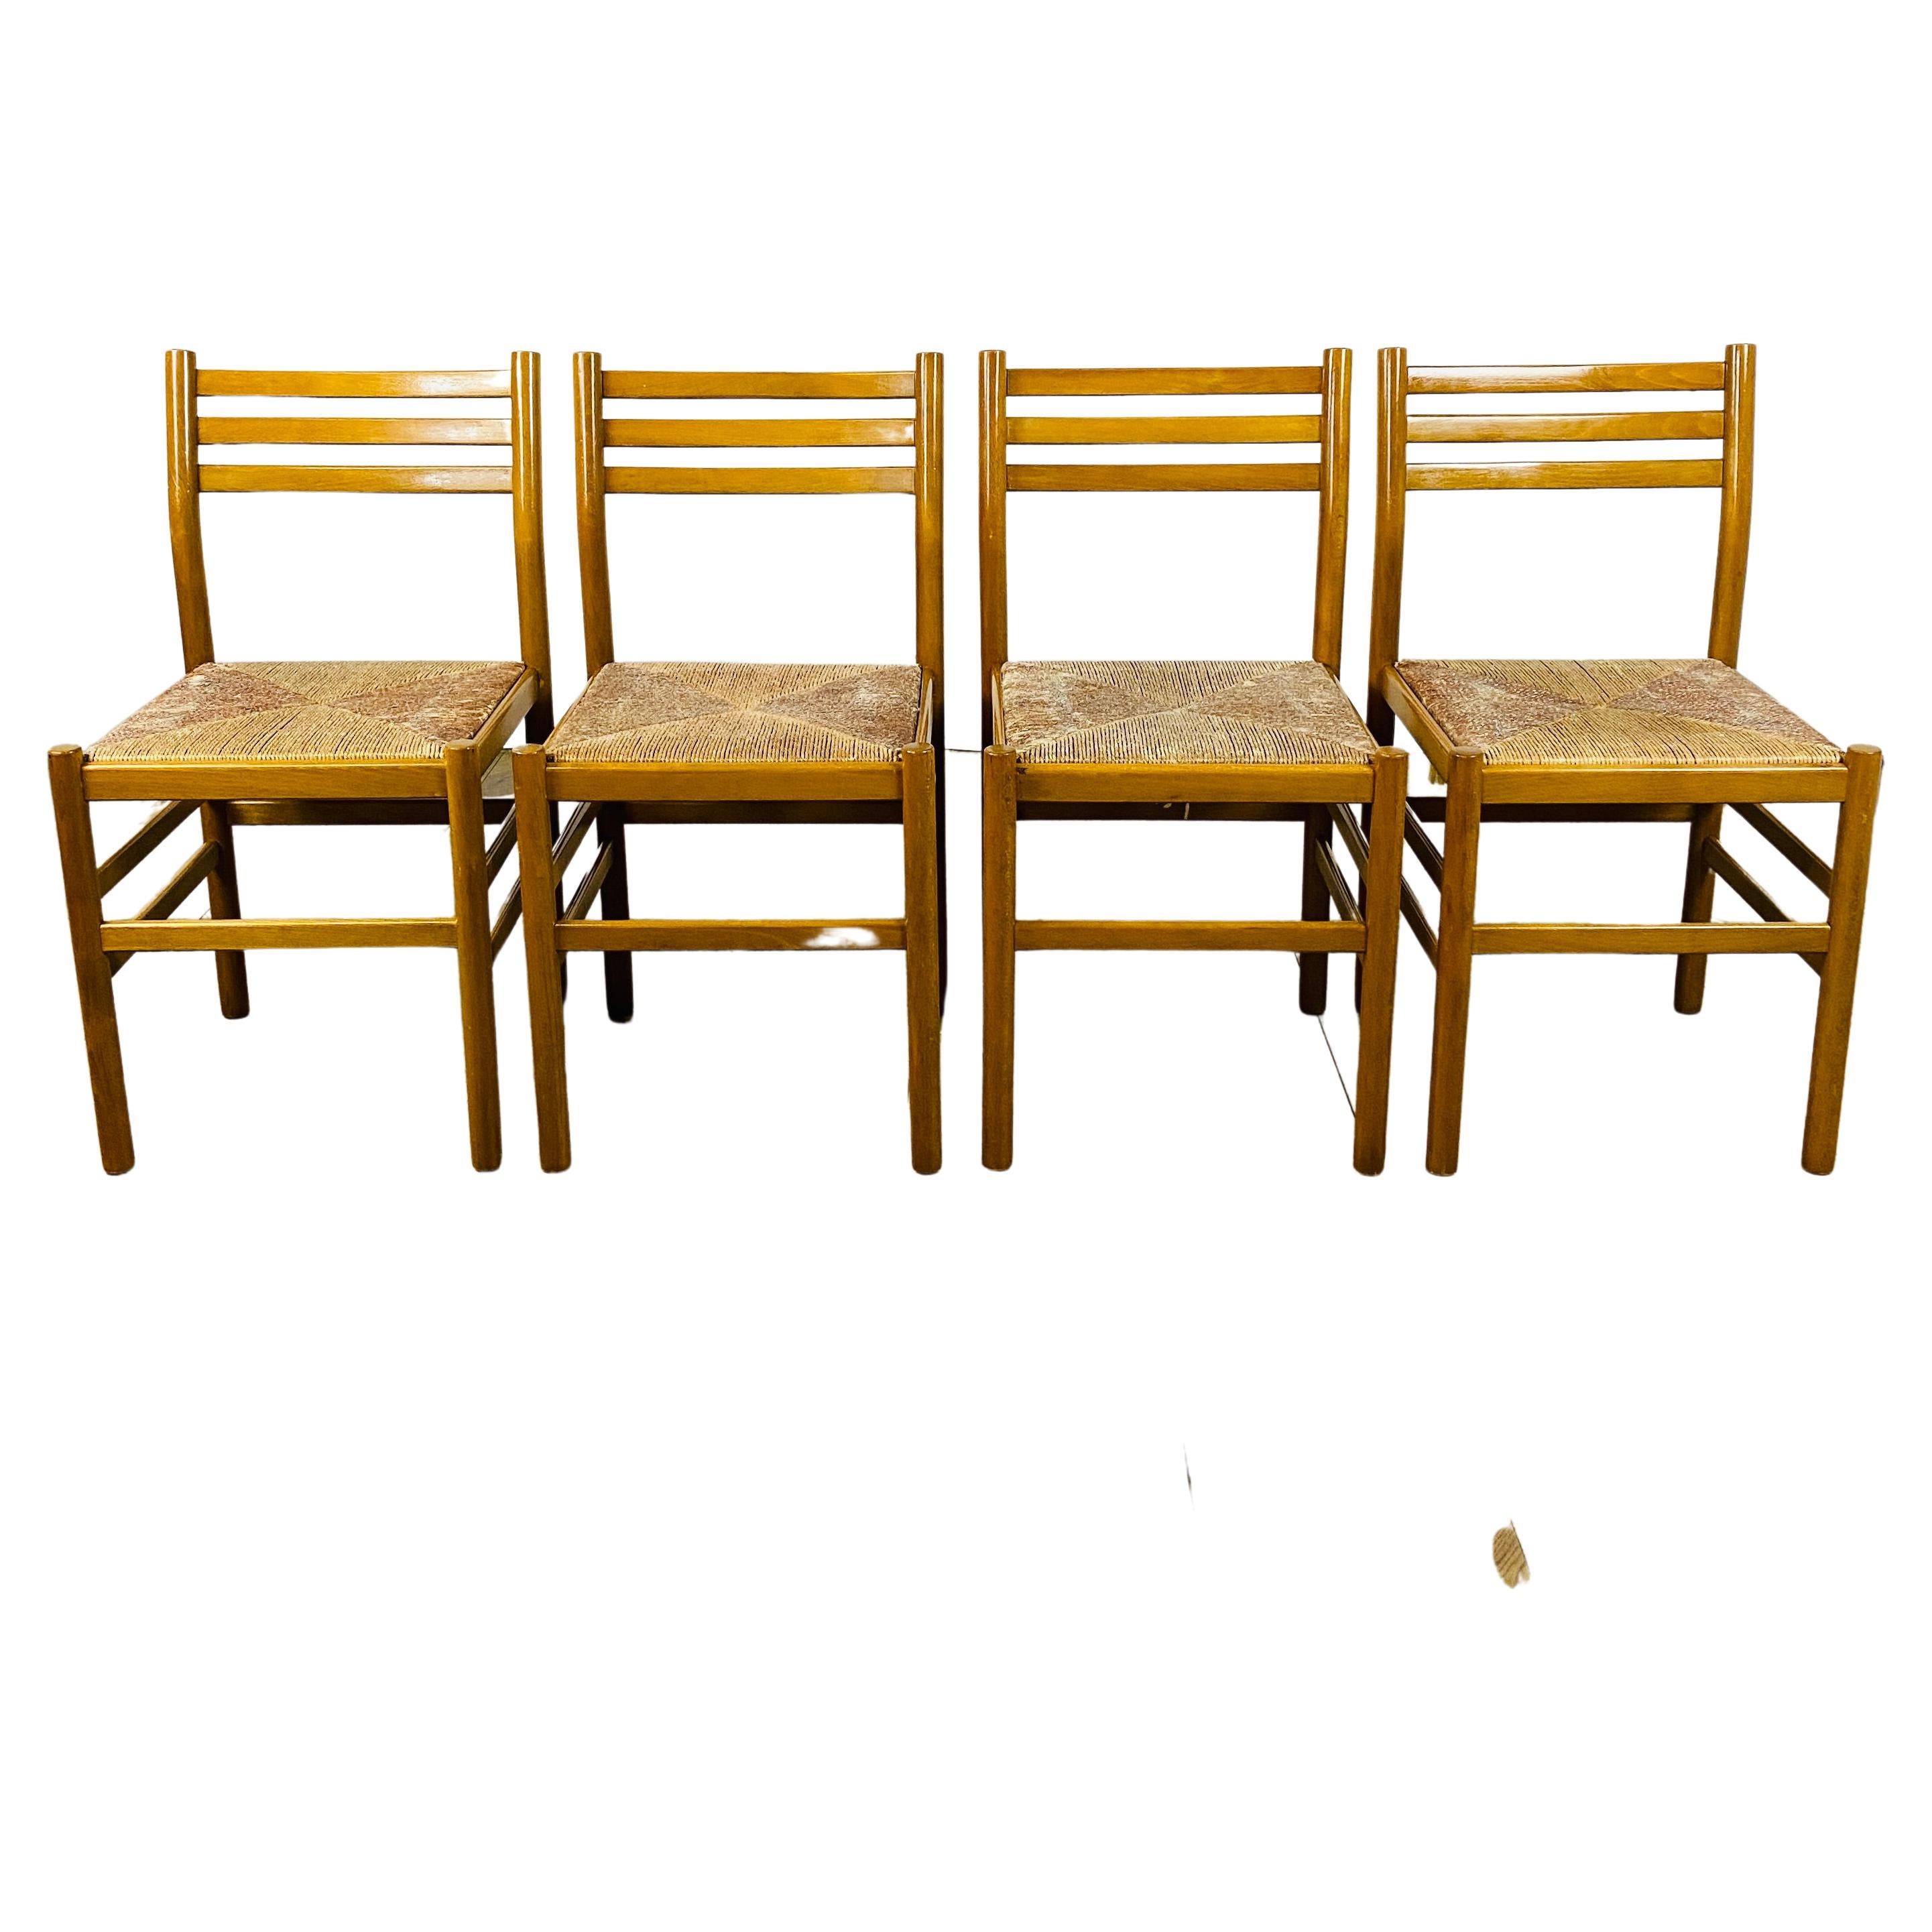 Vintage Dining Chairs, Set of 4, 1970s